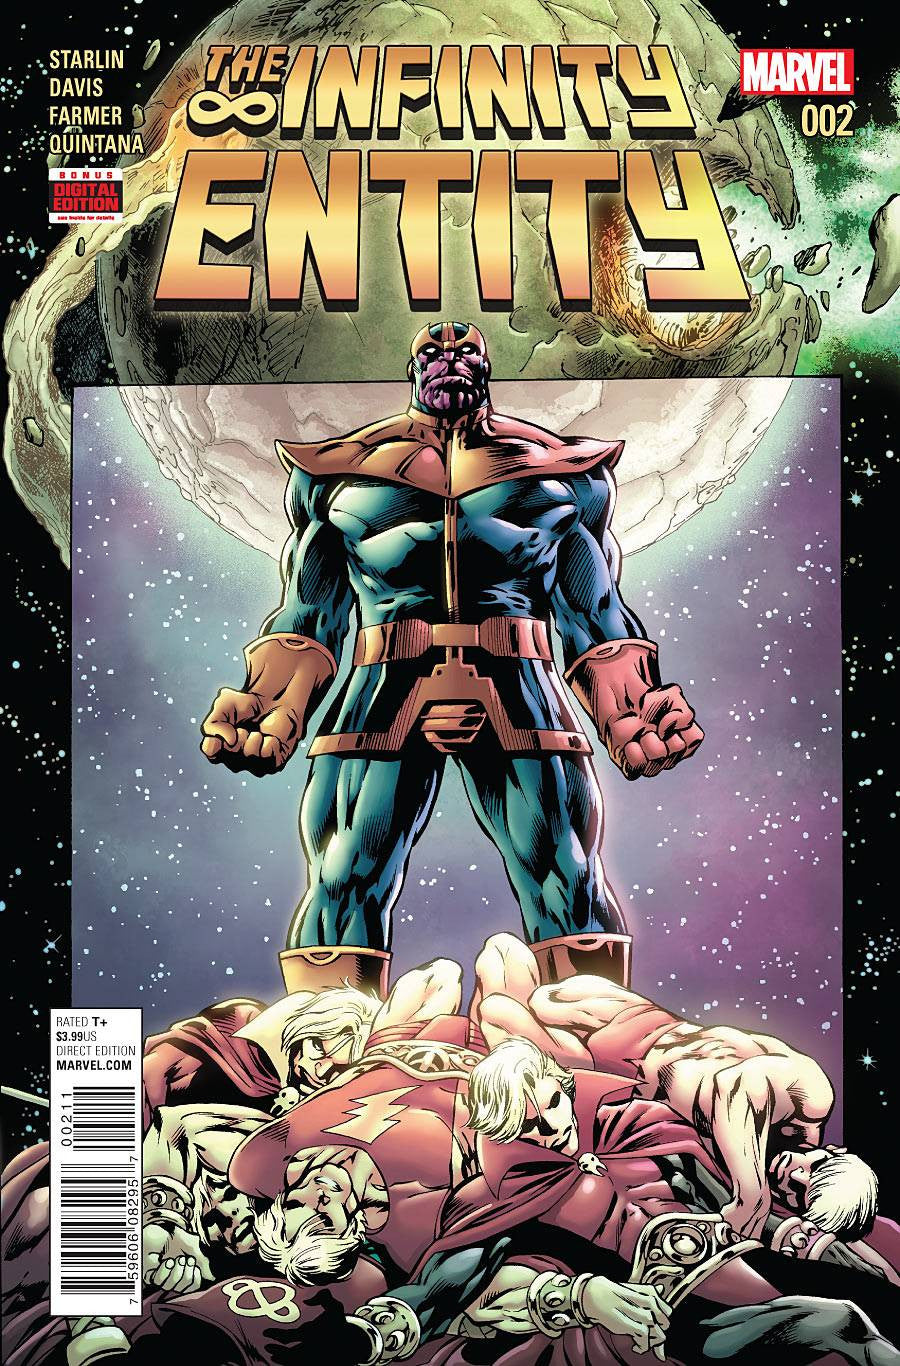 INFINITY ENTITY #2 (OF 4) COVER